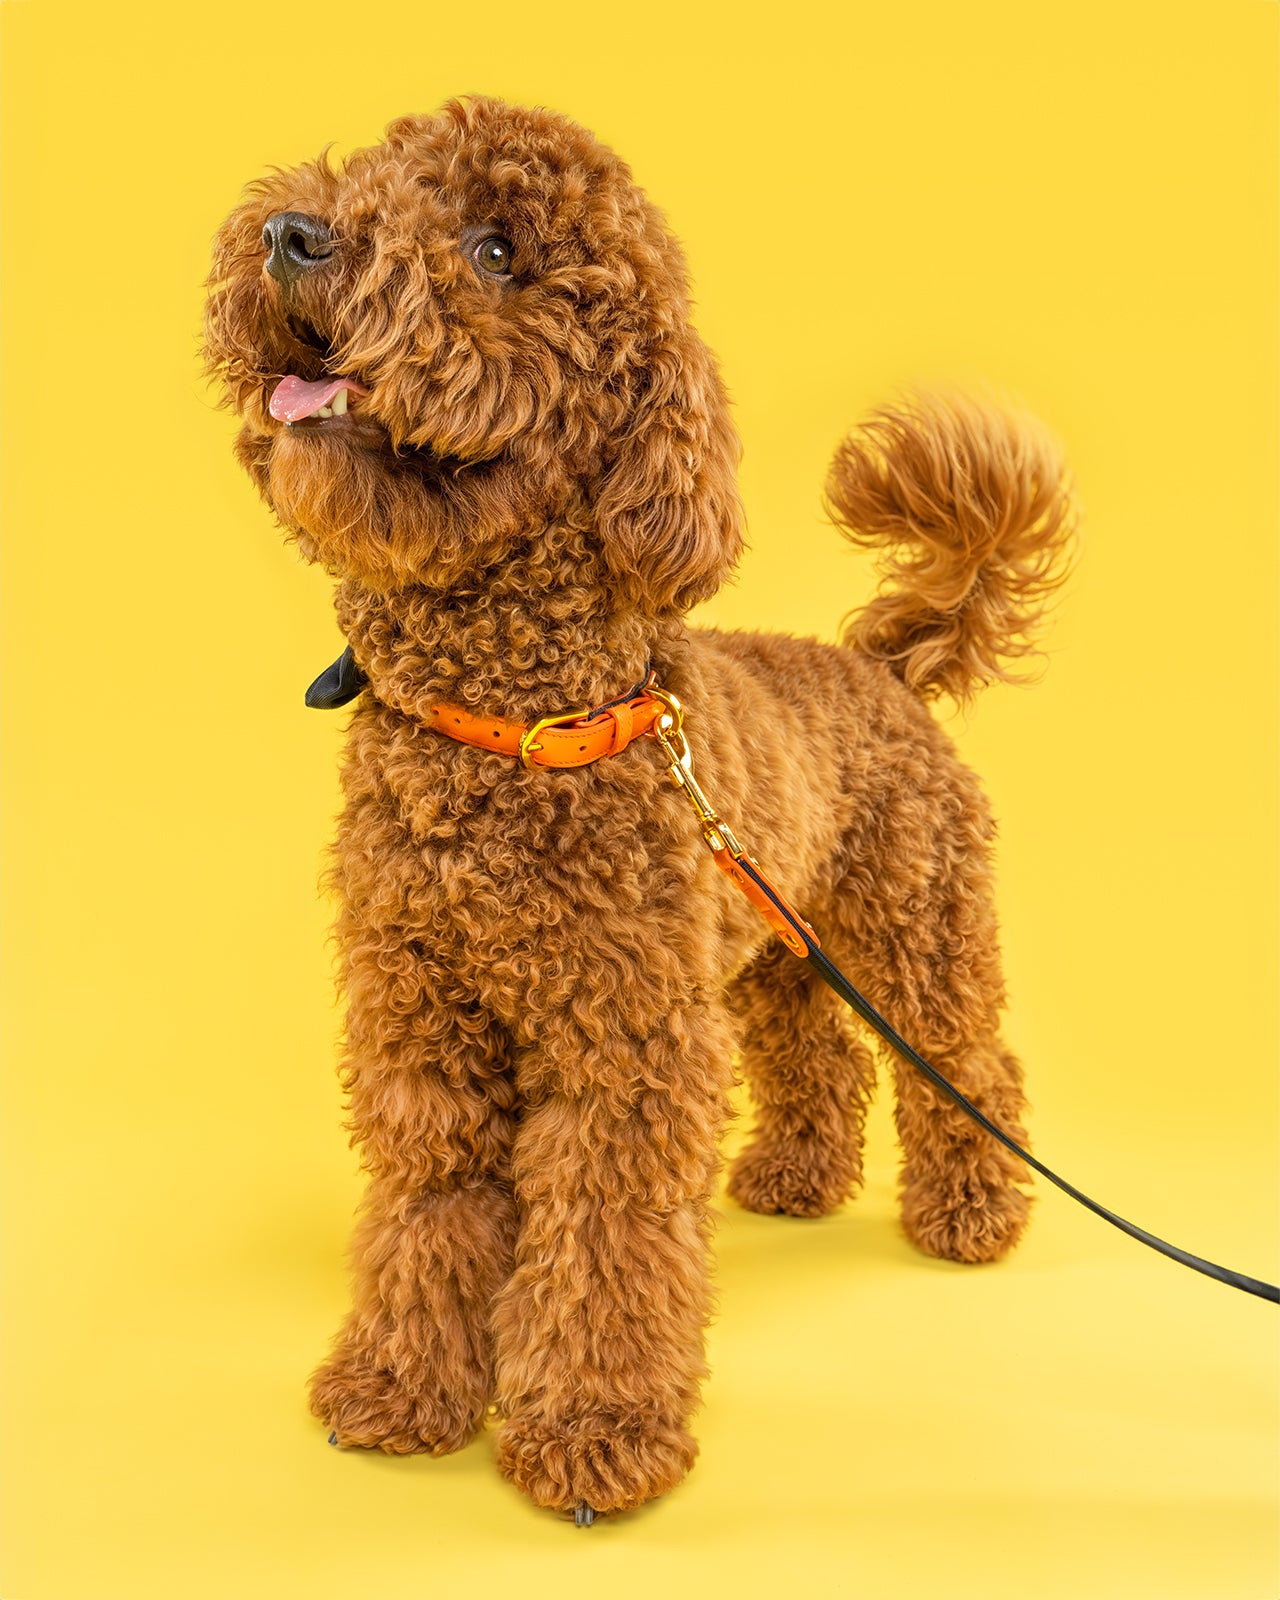 Poodle modelling a Dear Nora Tangerine orange leather and navy blue fabric dog collar and leash - yellow background